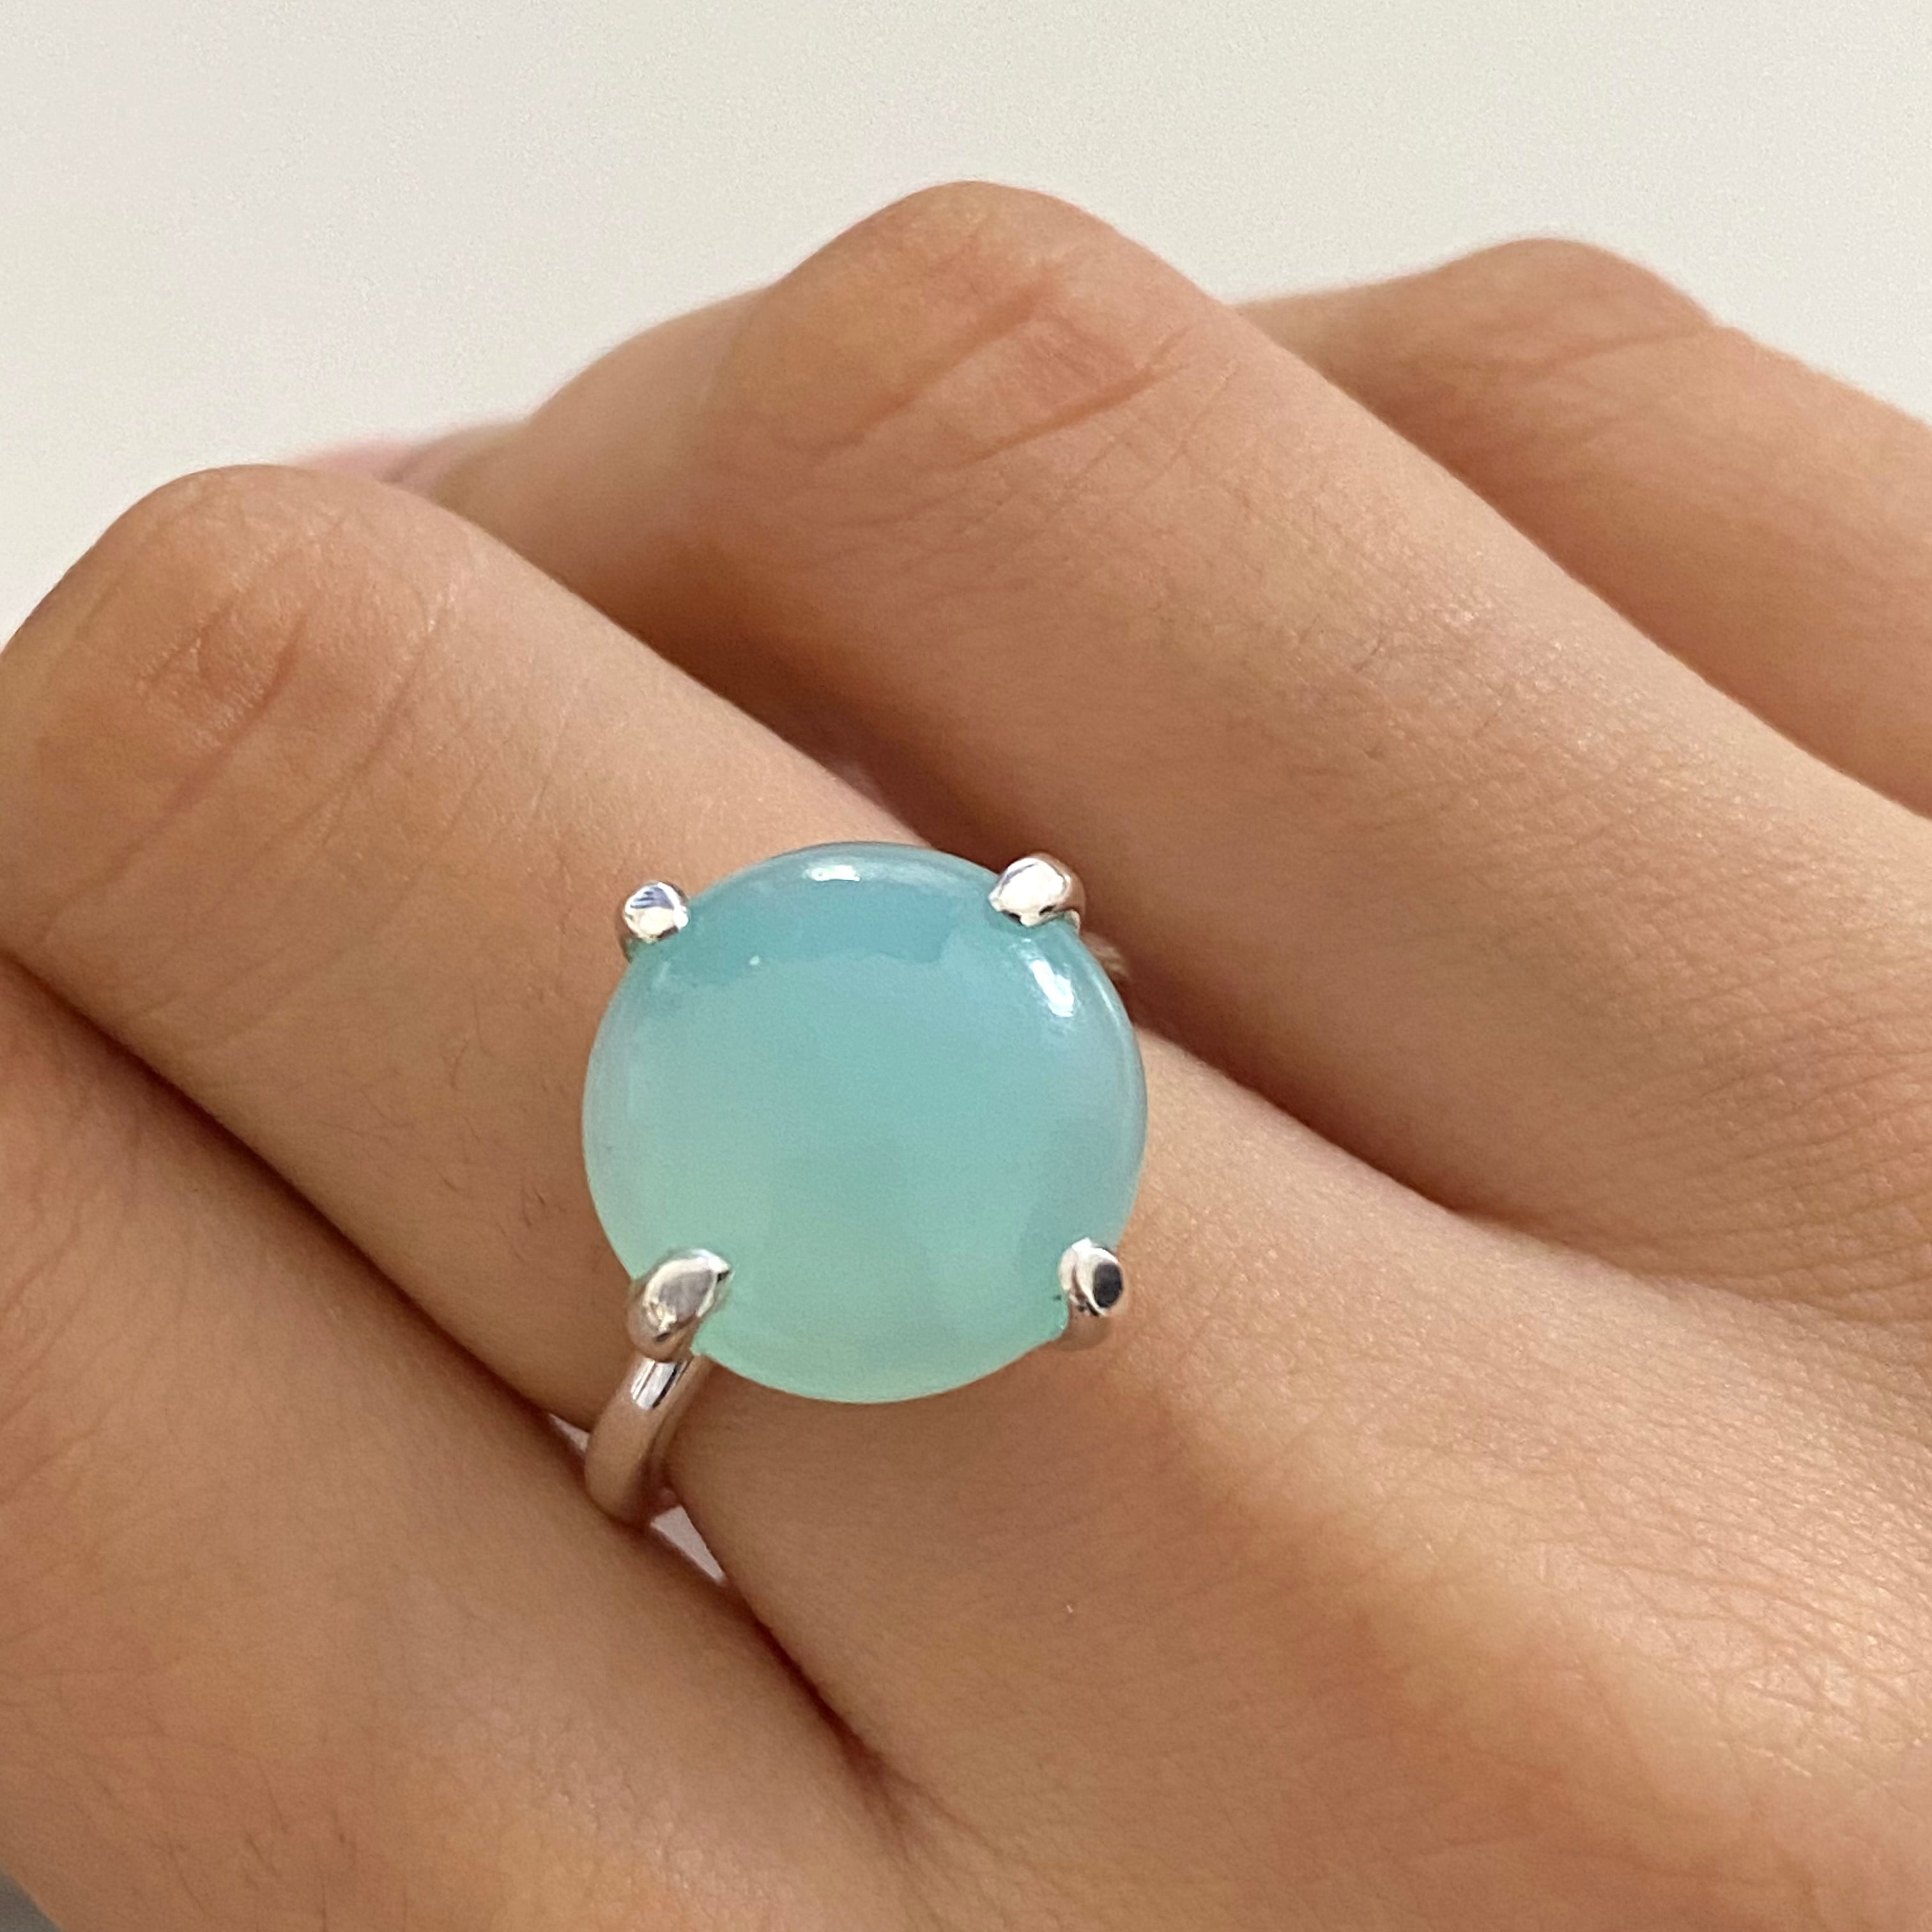 Round Cabochon Aqua Chalcedony Ring in Sterling Silver